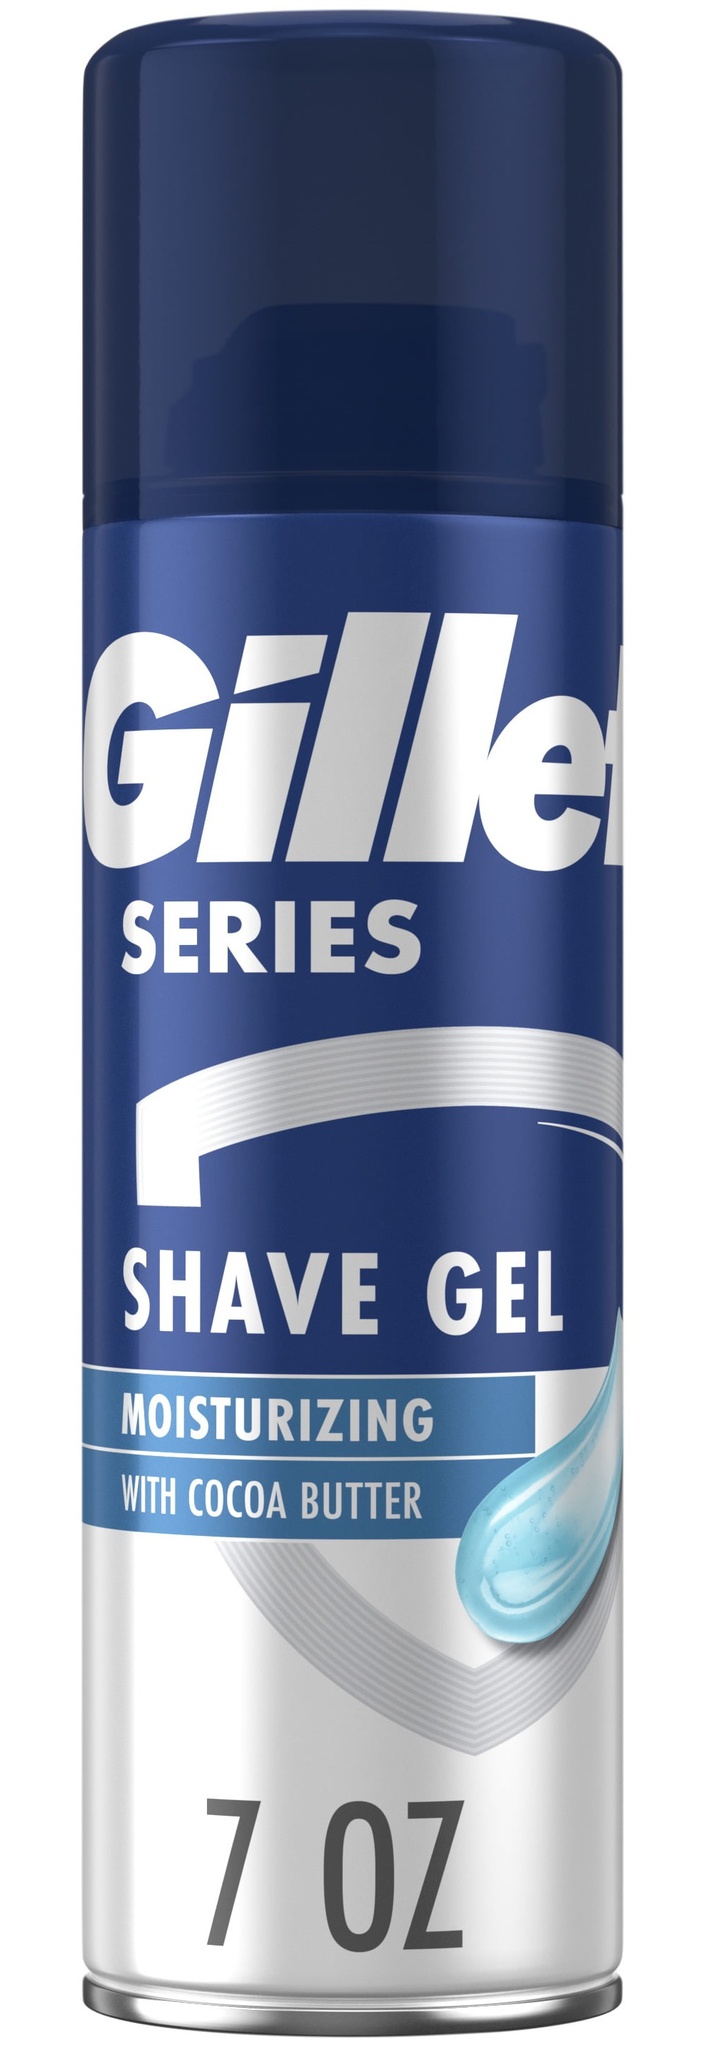 Gillette Shave Gel With Cocoa Butter